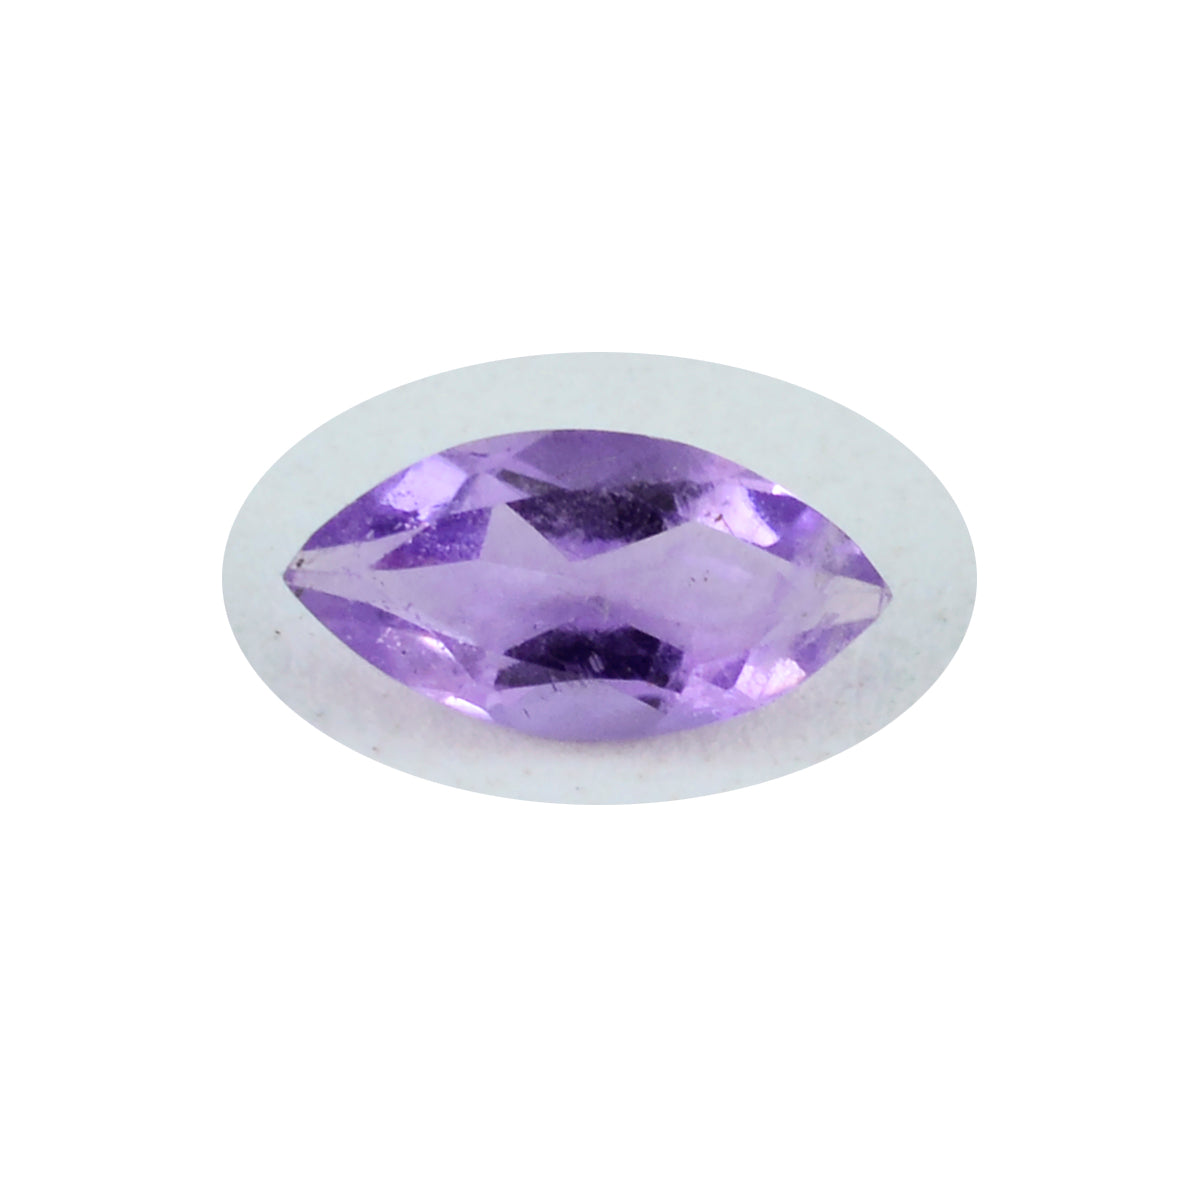 Riyogems 1PC Natural Purple Amethyst Faceted 8x16 mm Marquise Shape amazing Quality Stone